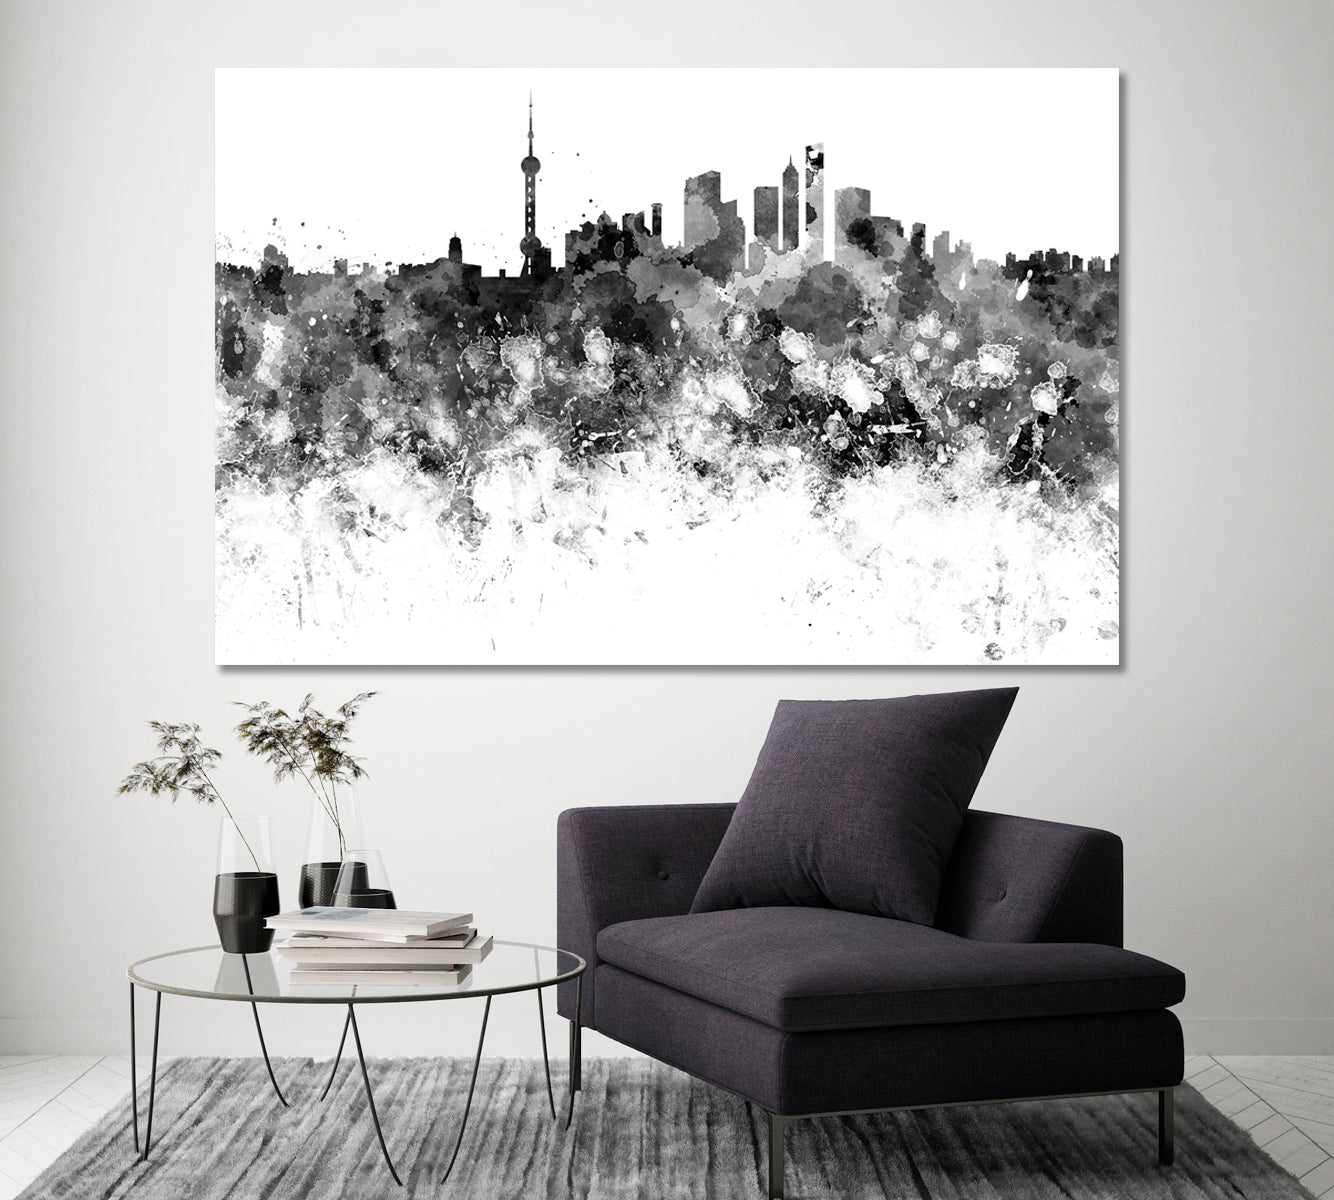 Abstract Black And White Shanghai Skyline Canvas Print ArtLexy 1 Panel 24"x16" inches 